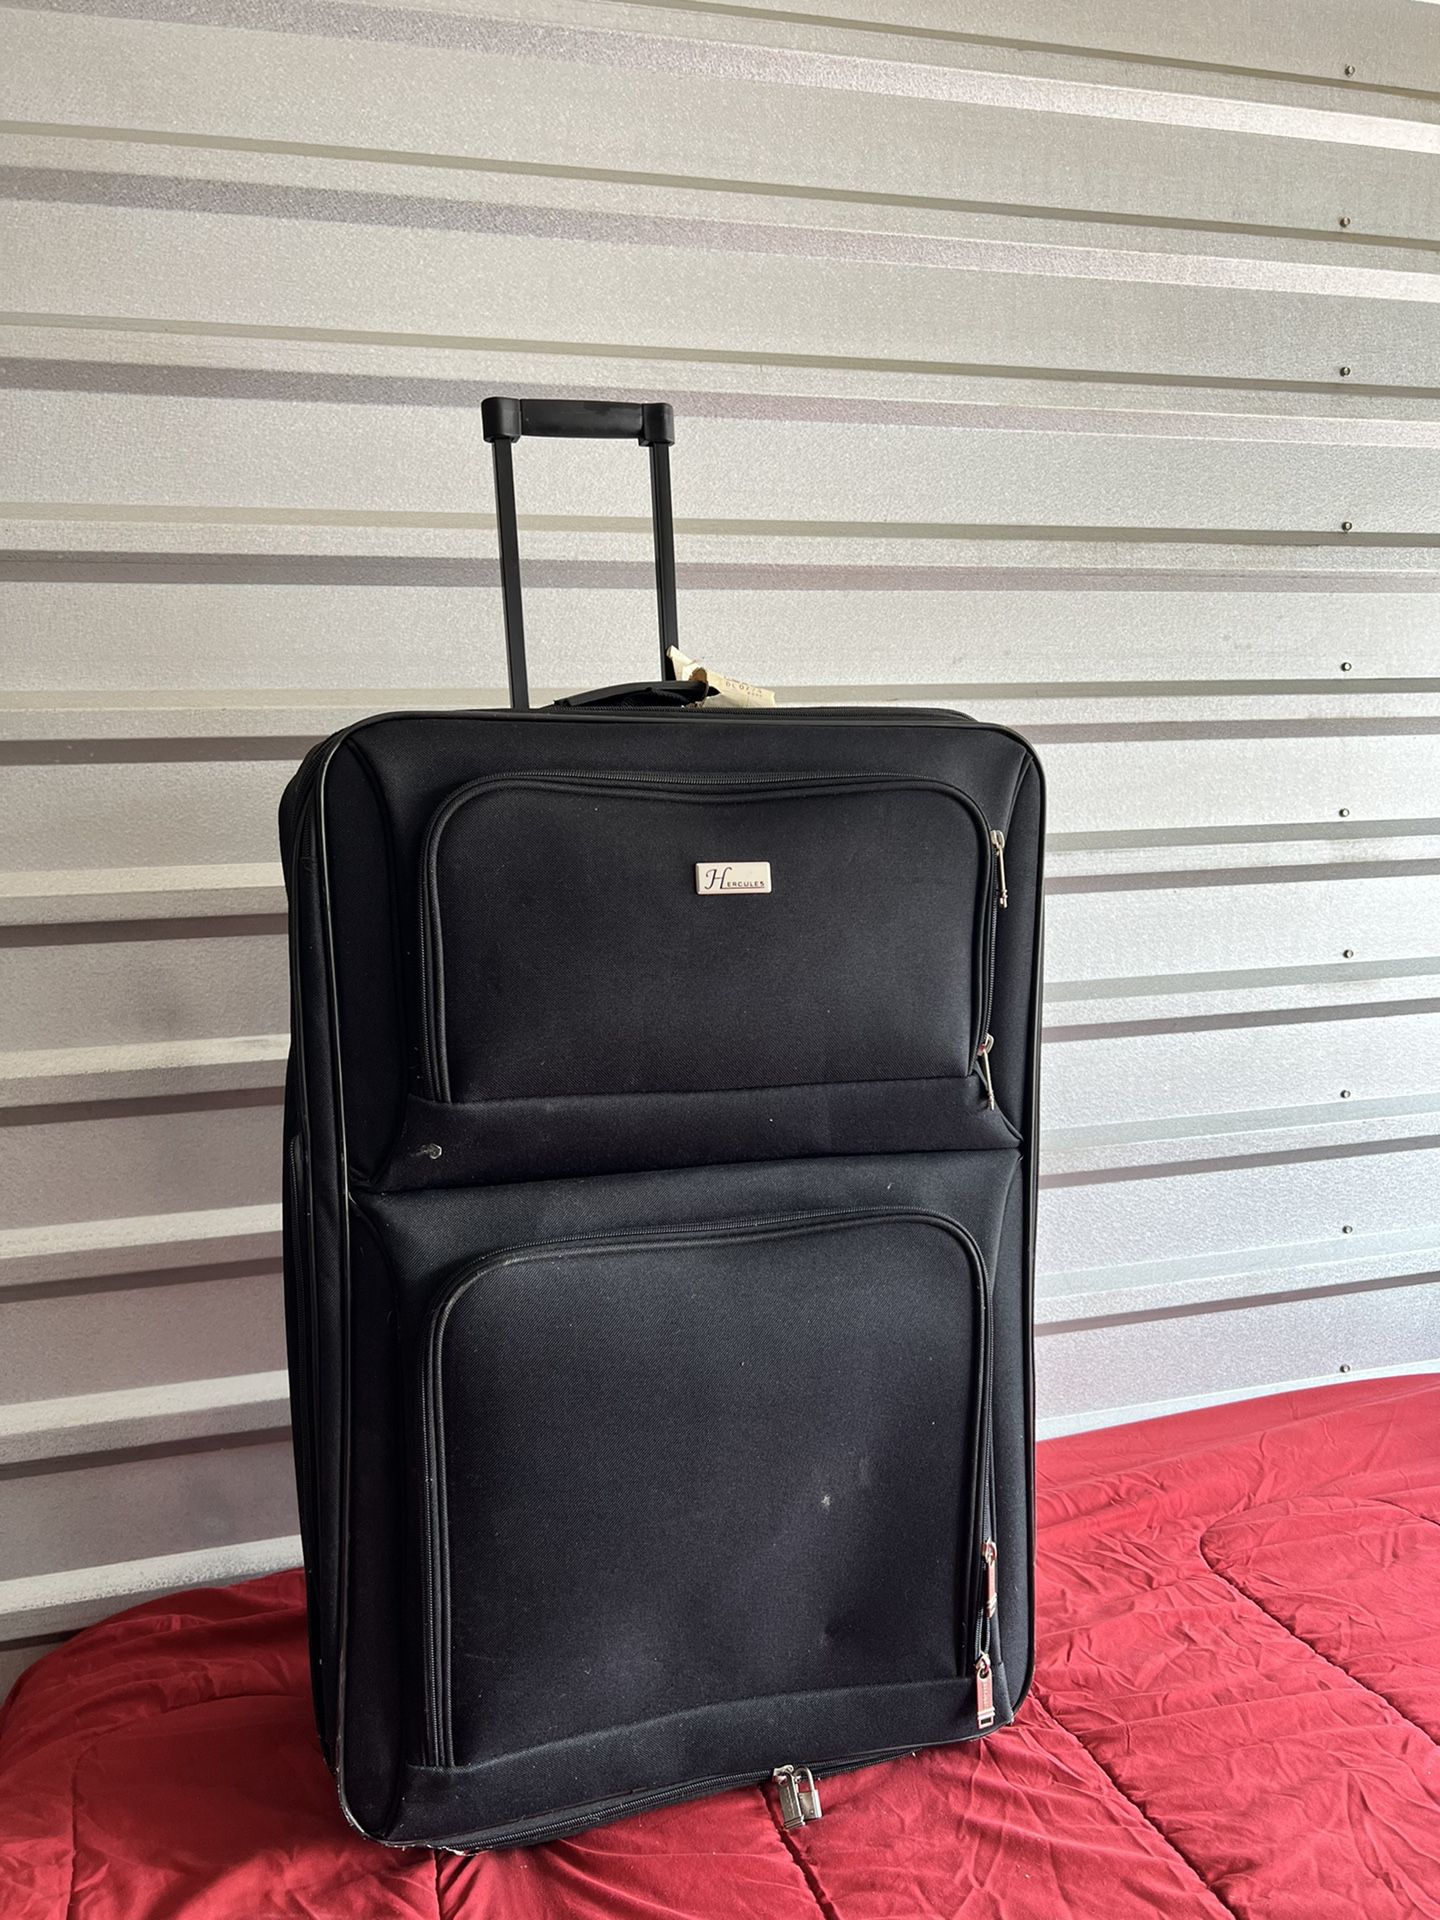 Garment Bag And Suitcase 